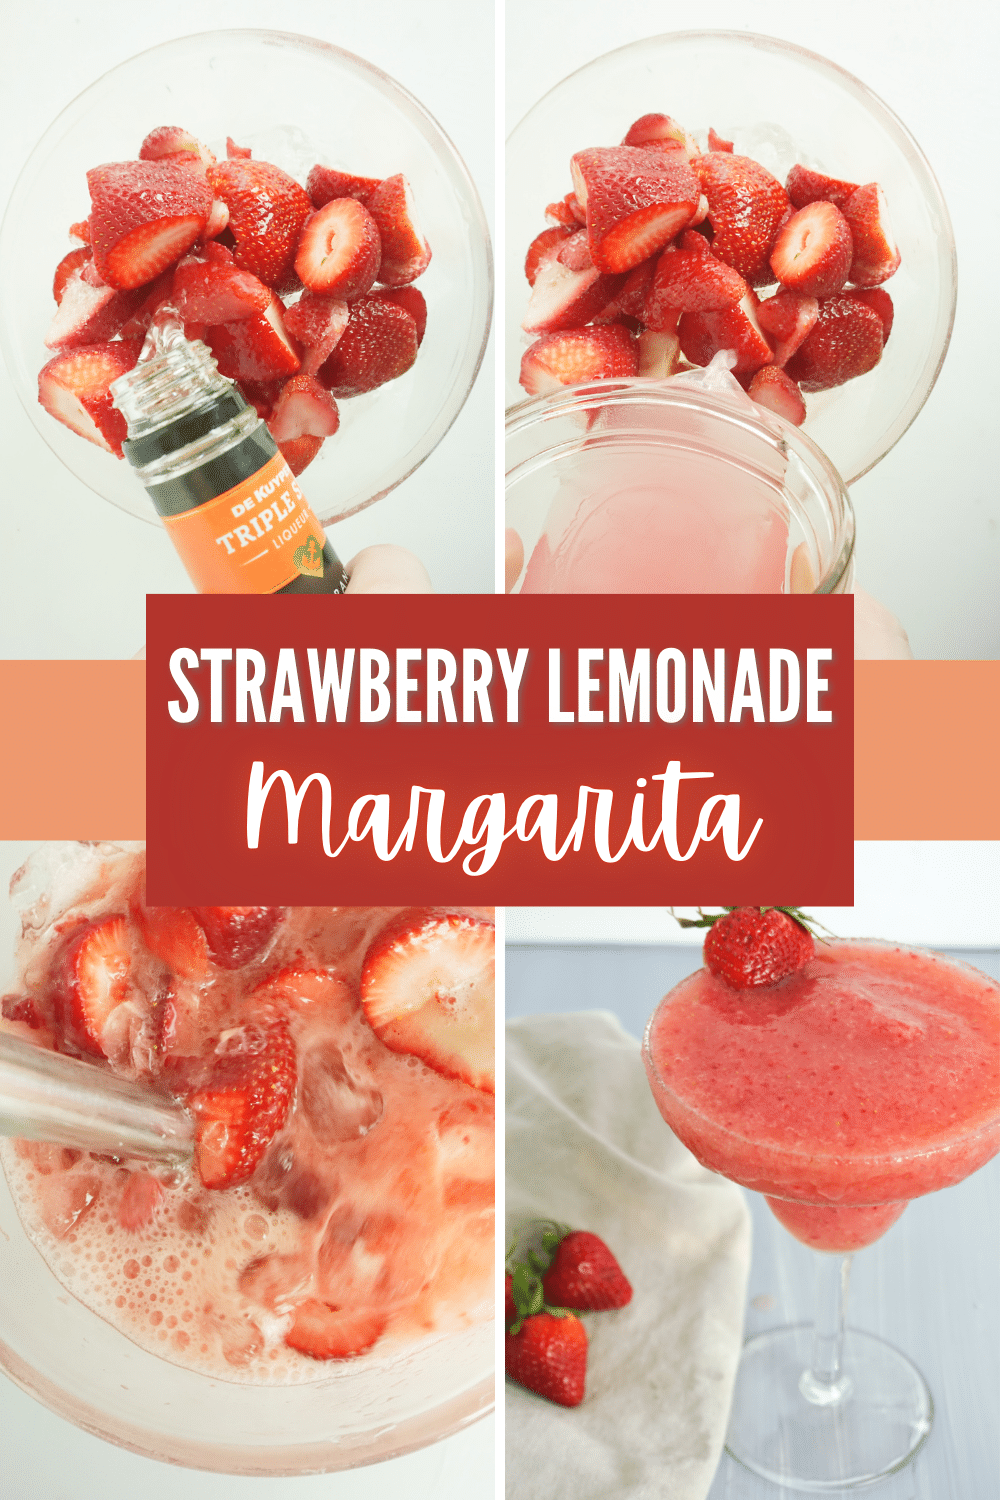 This Strawberry Lemonade Margarita is a refreshing and delicious twist on the classic margarita. It will tantalize your taste buds. #lemonademargarita #strawberrylemonademargarita #margaritas #margaritarecipes #pinklemonademargarita via @wondermomwannab